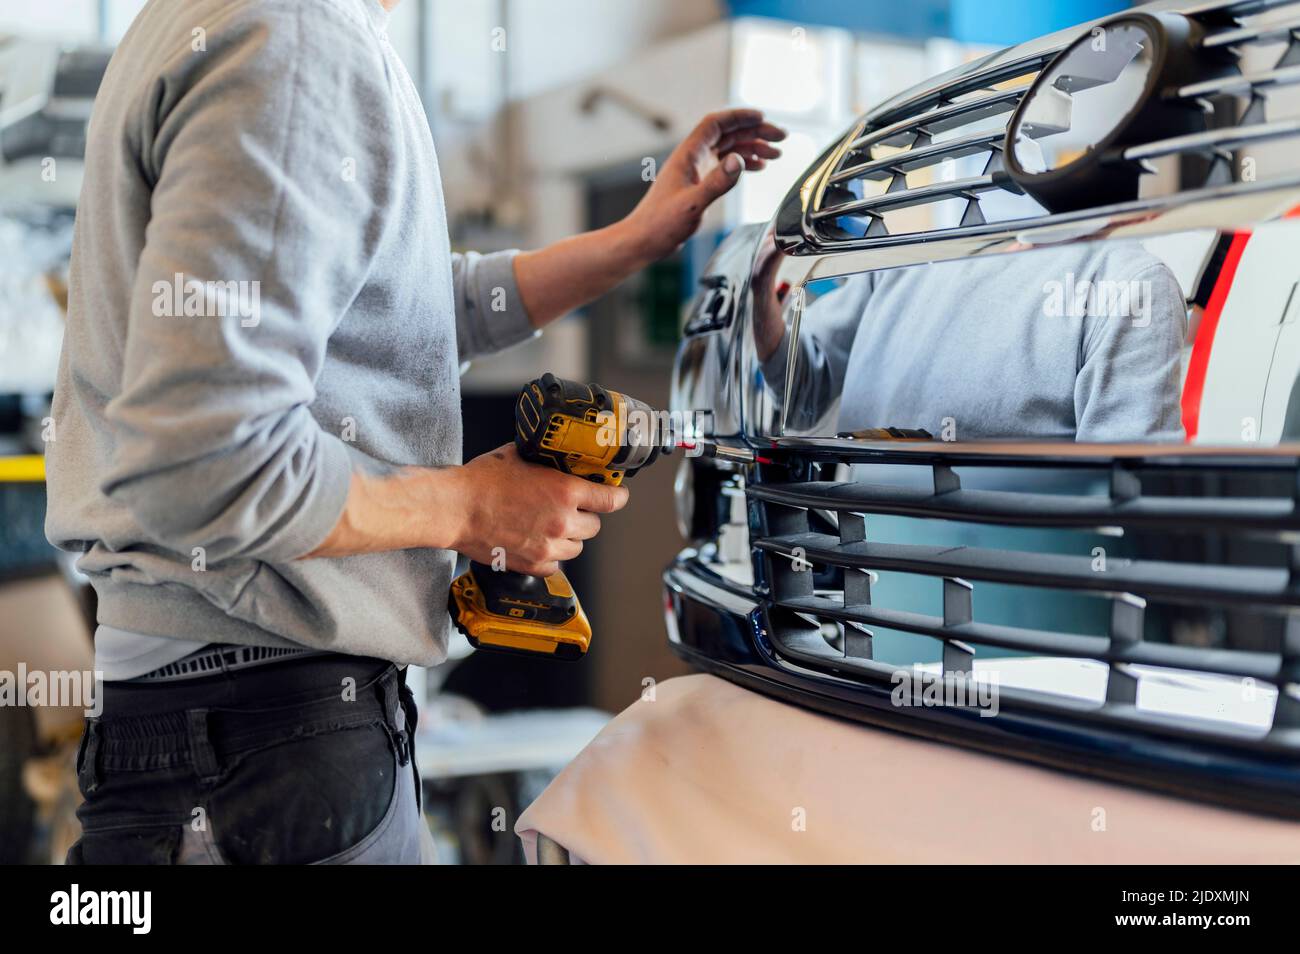 Auto mechanic holding power tool working in workshop Stock Photo